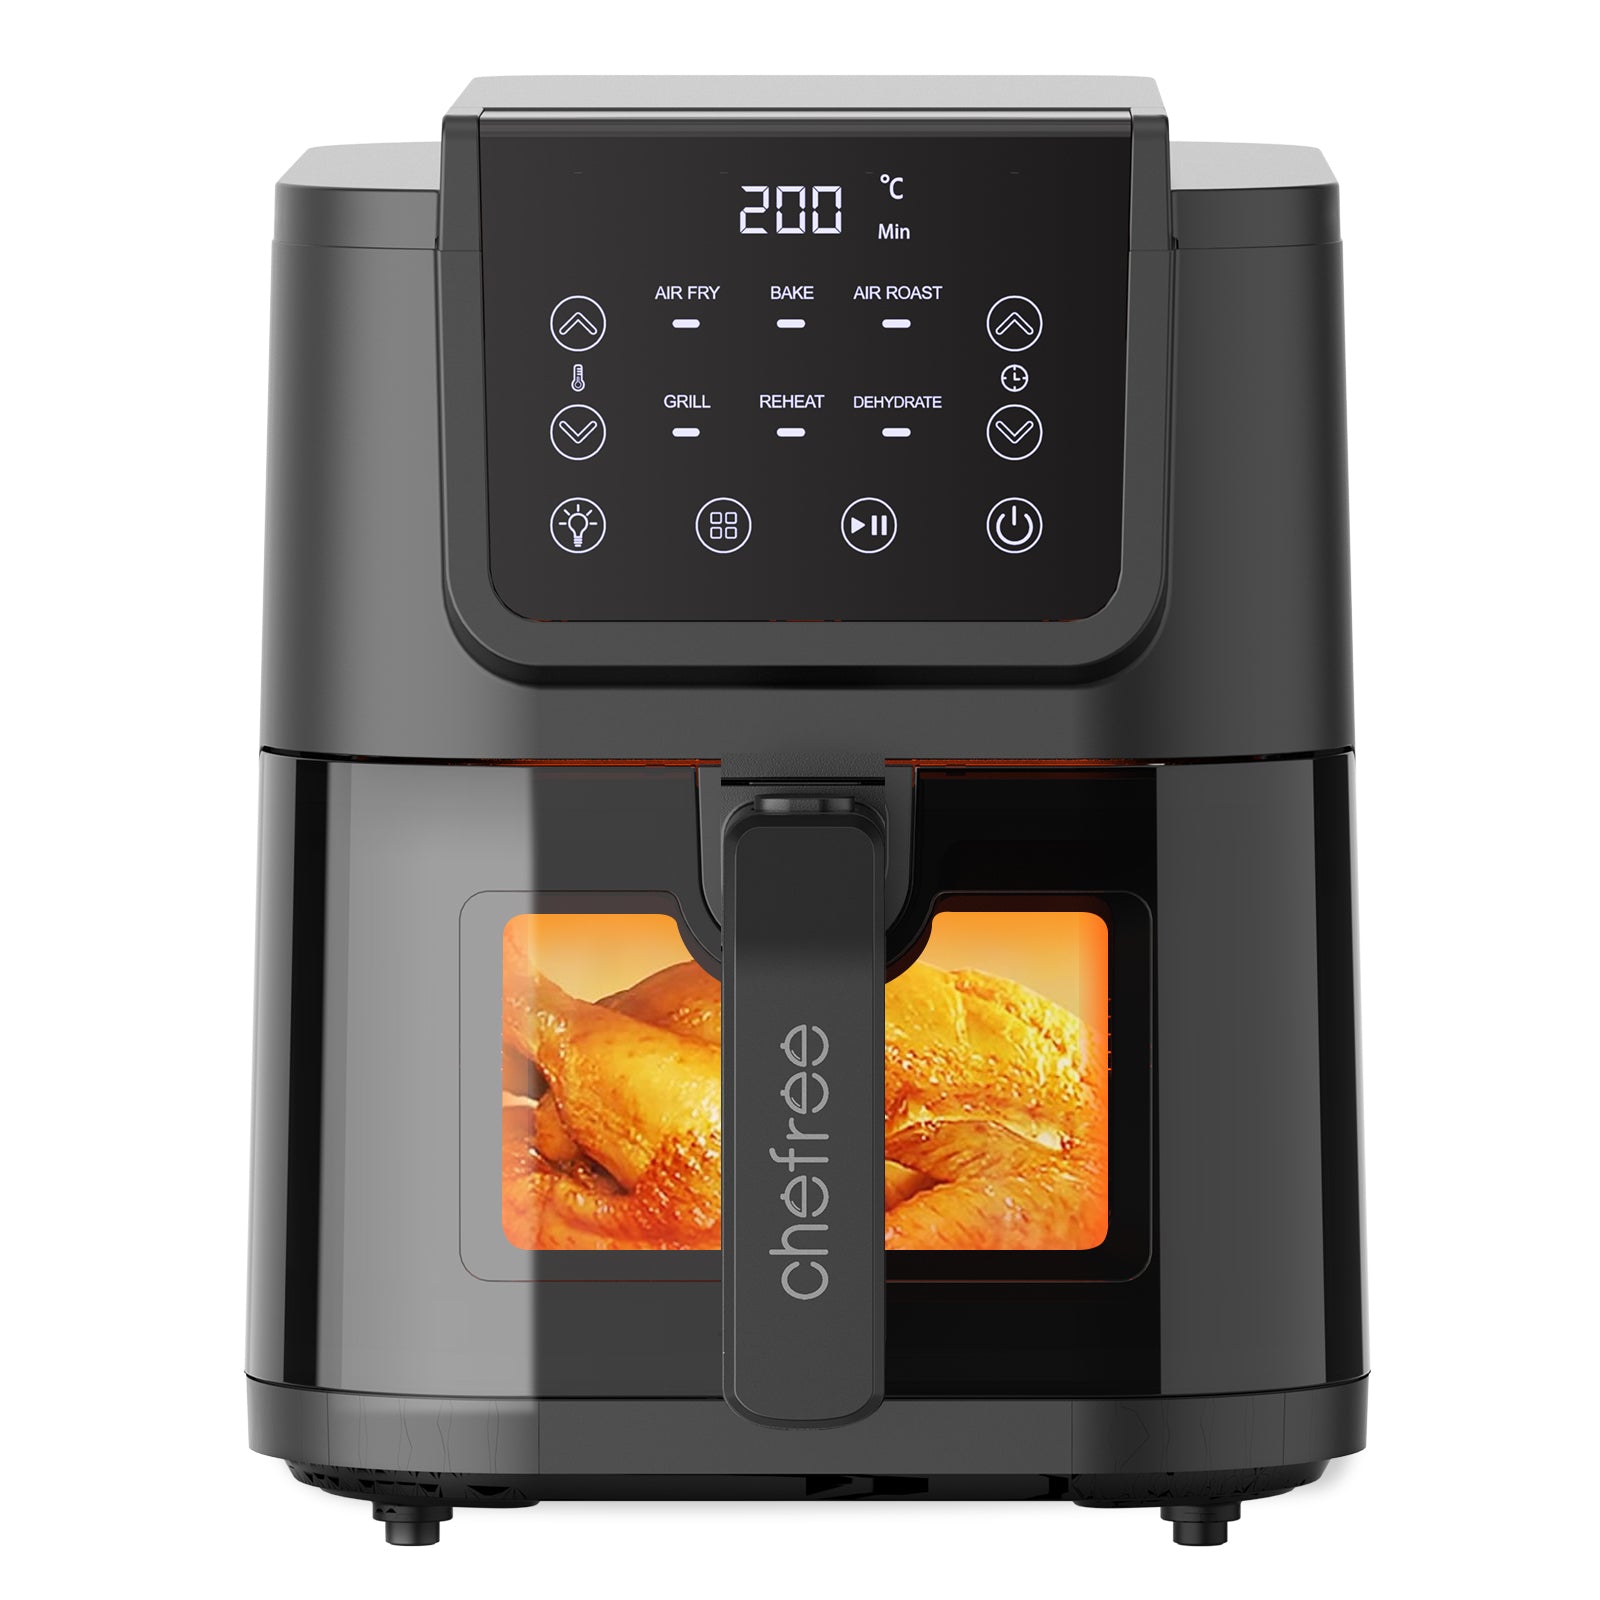 Introducing: CHEFREE ViewCook 6-in-1 AFW01 Air Fryer 